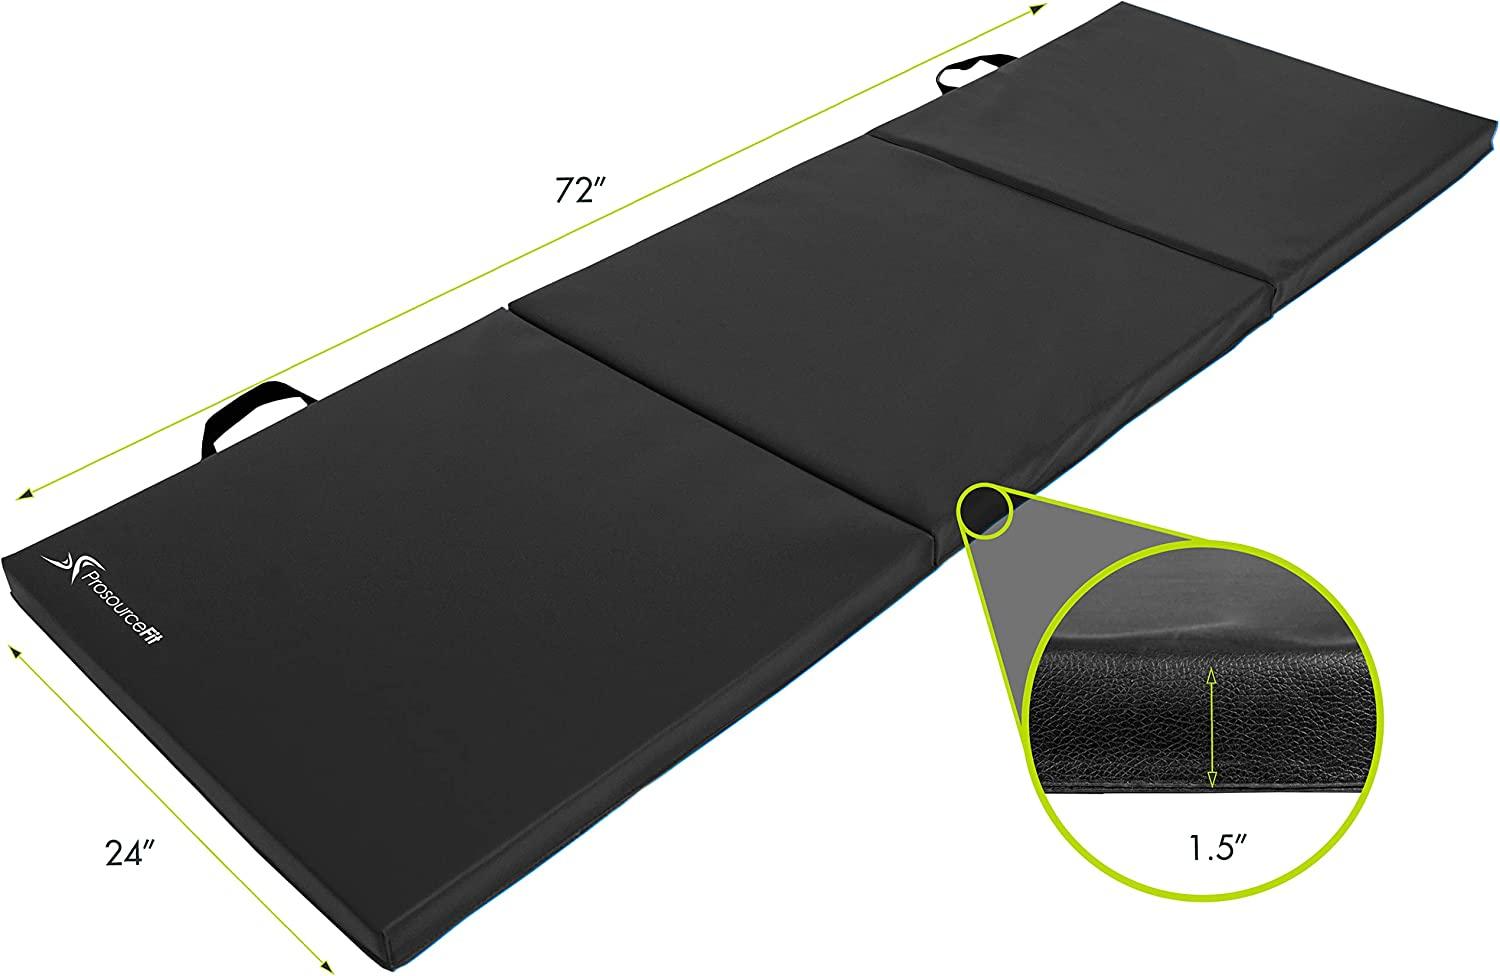 ProSource Tri-Fold Folding Thick Exercise Mat 6'x4', Carrying Handles, Black